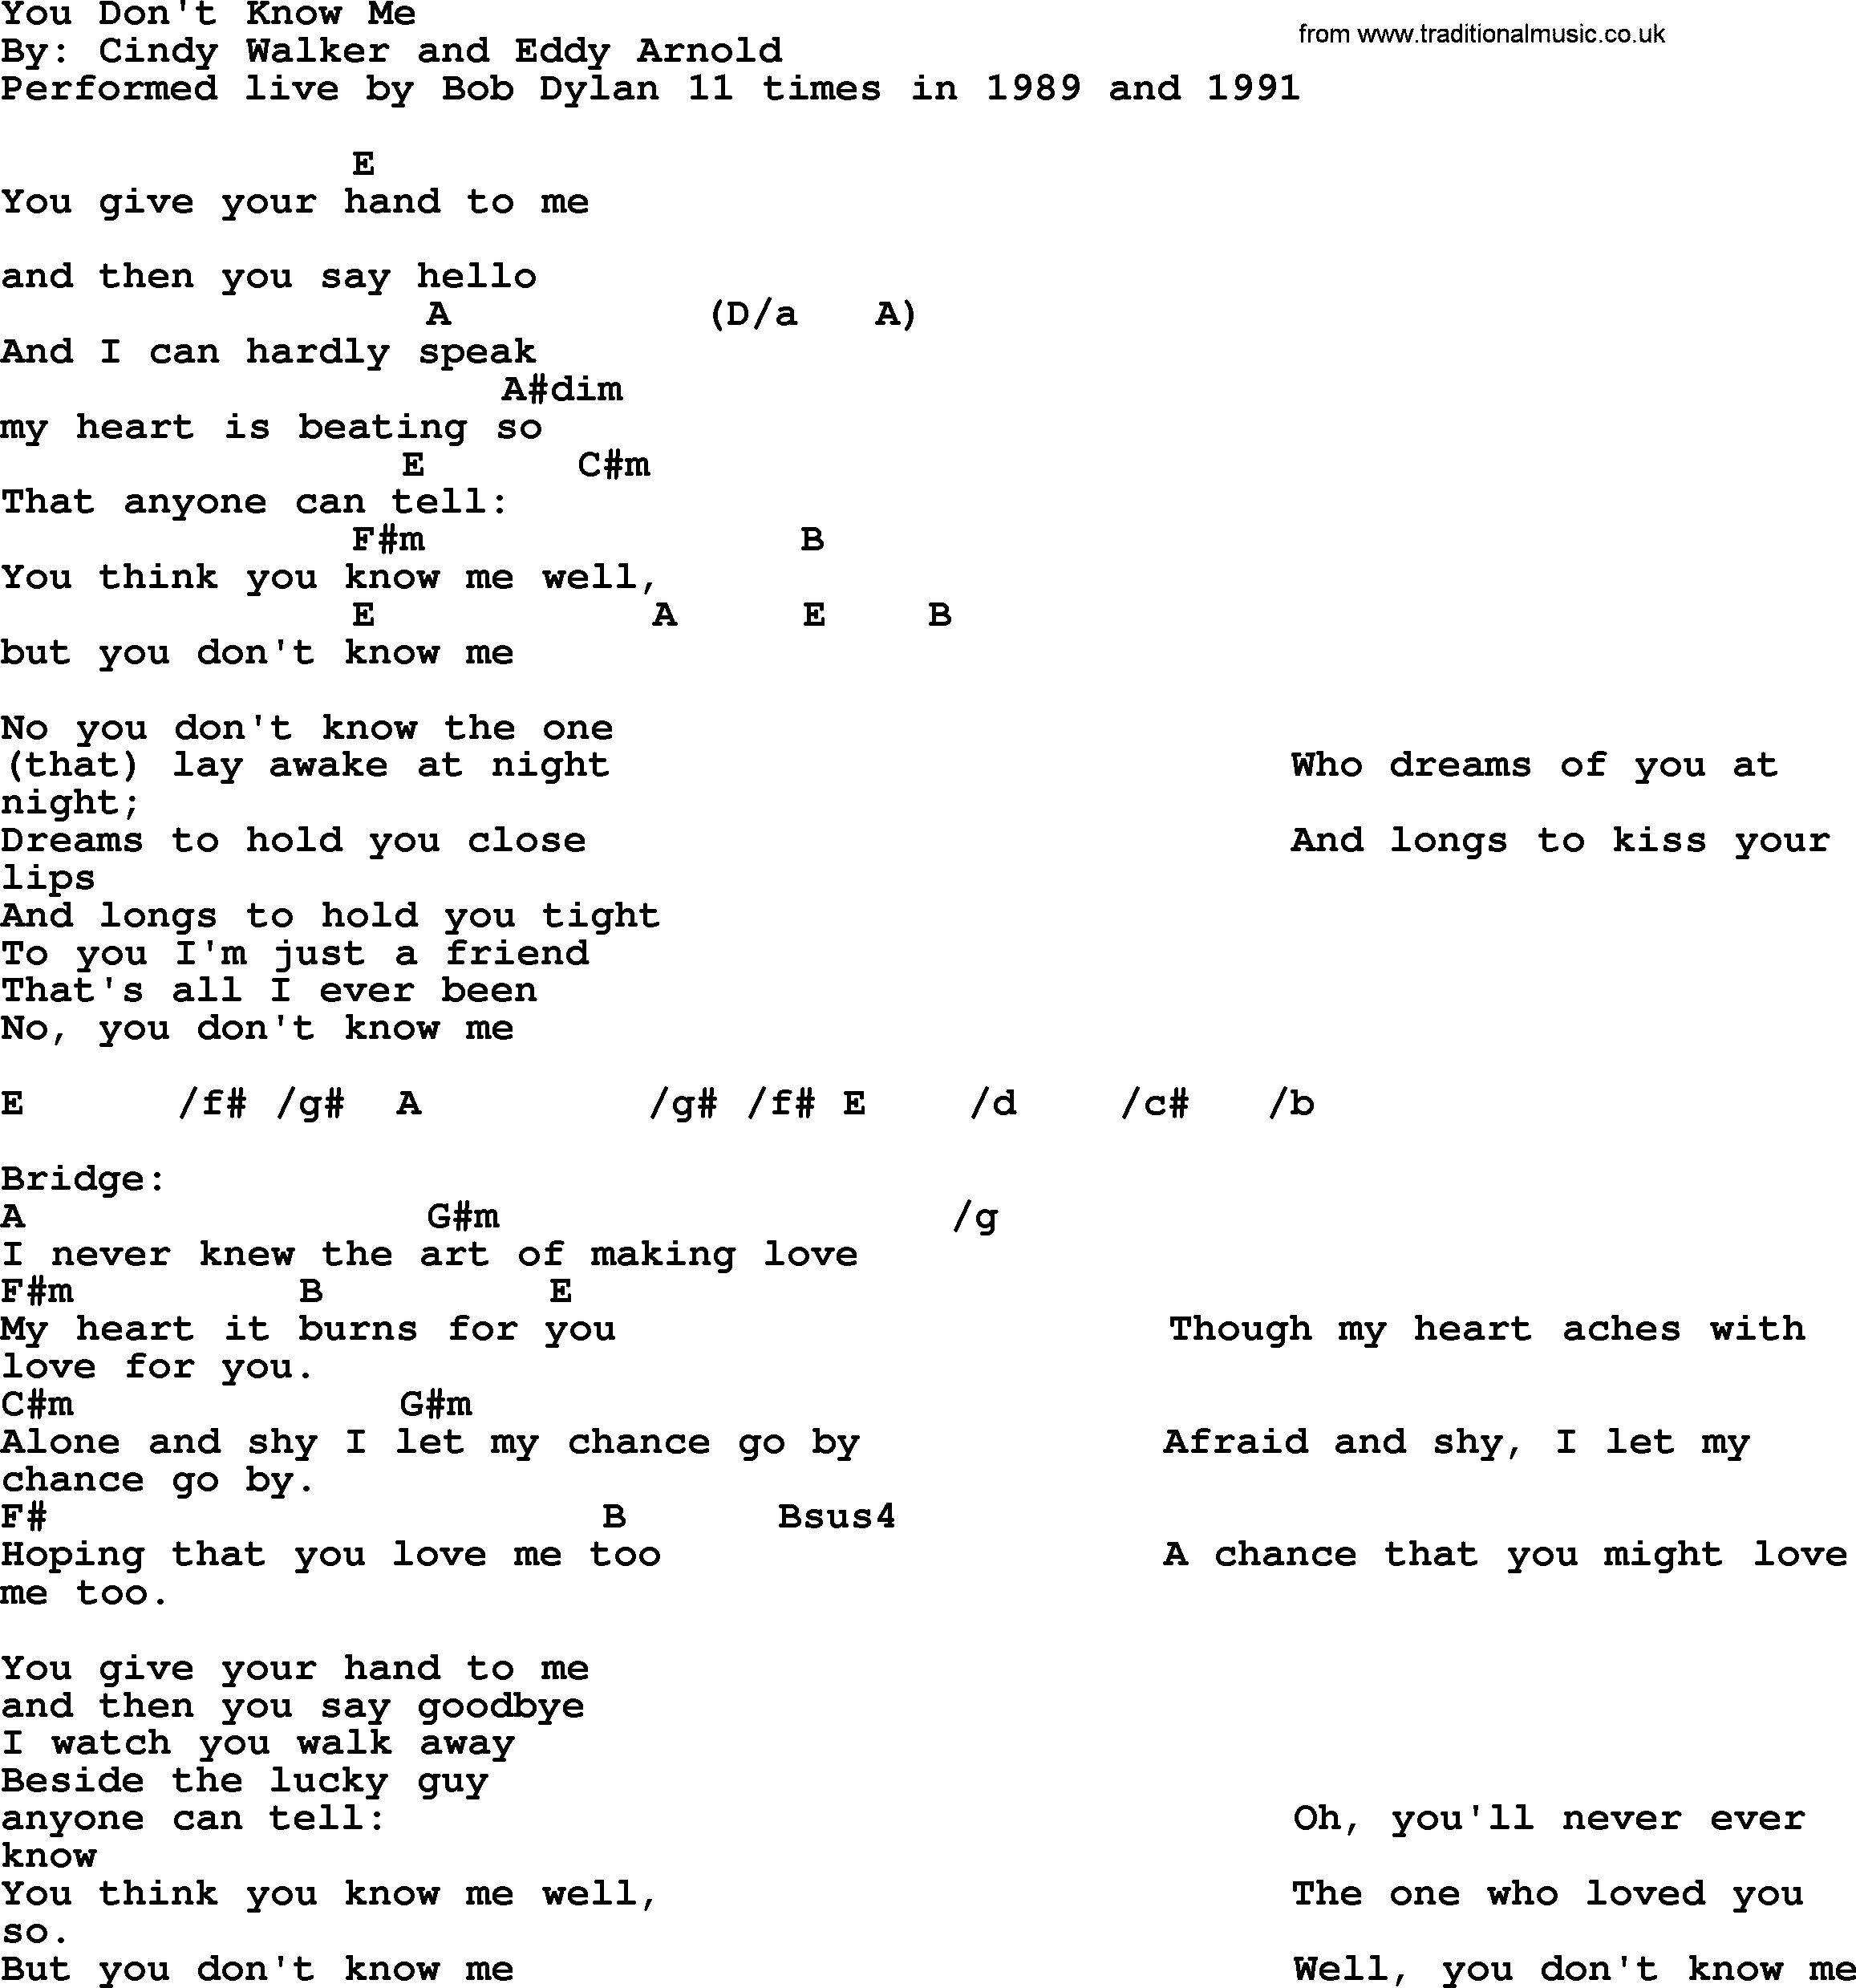 Bob Dylan song, lyrics with chords - You Don't Know Me